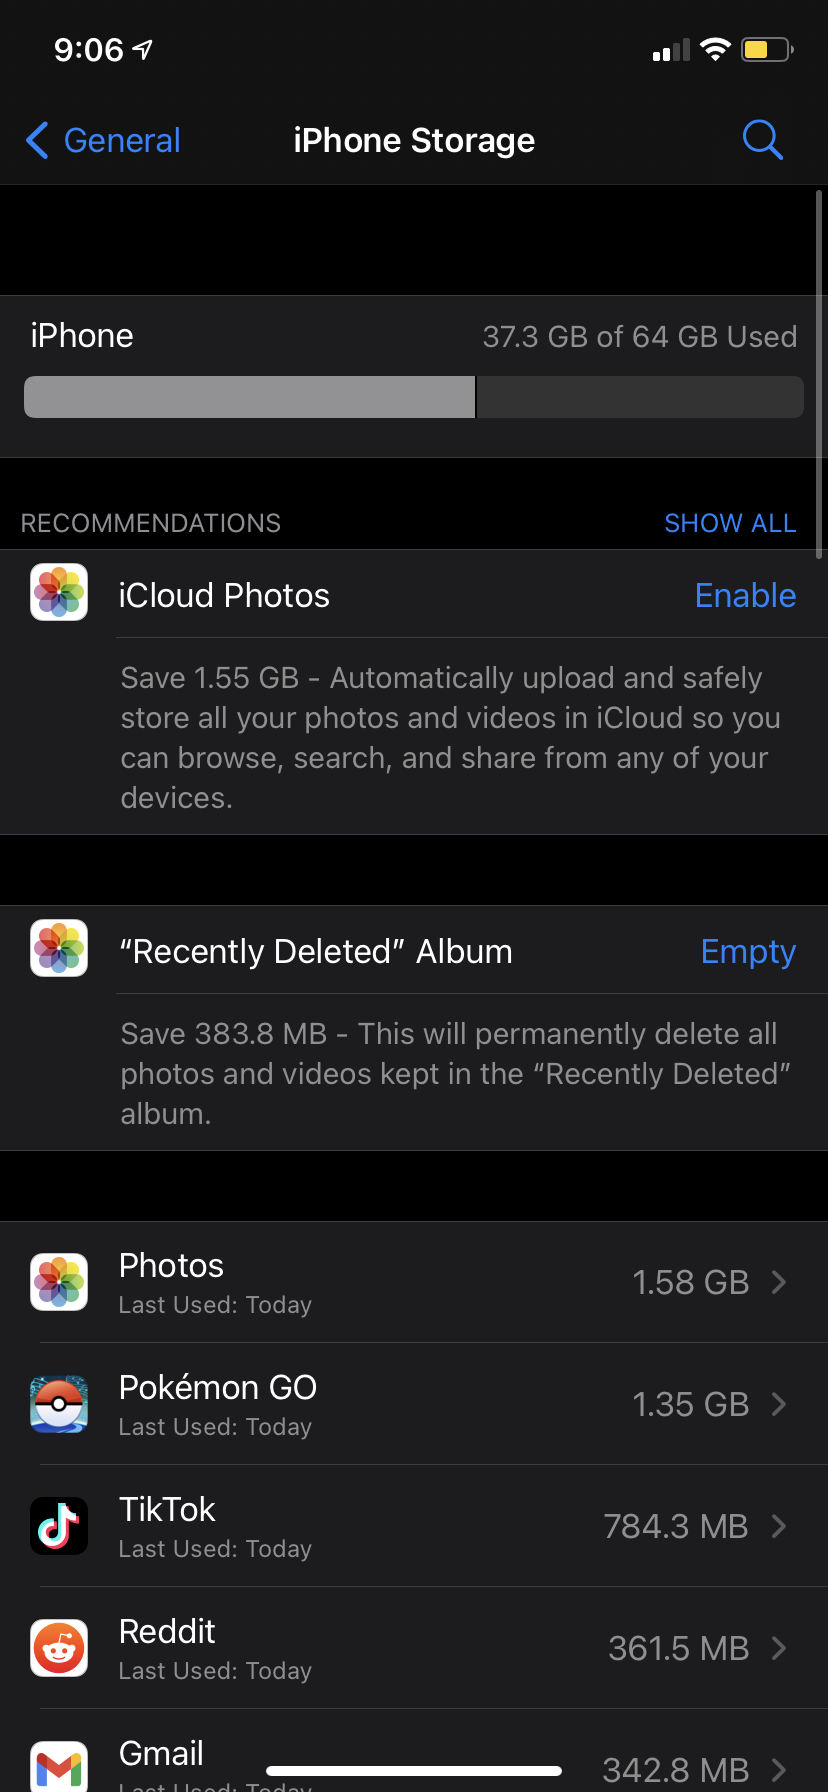 Why does Apple use so much storage?